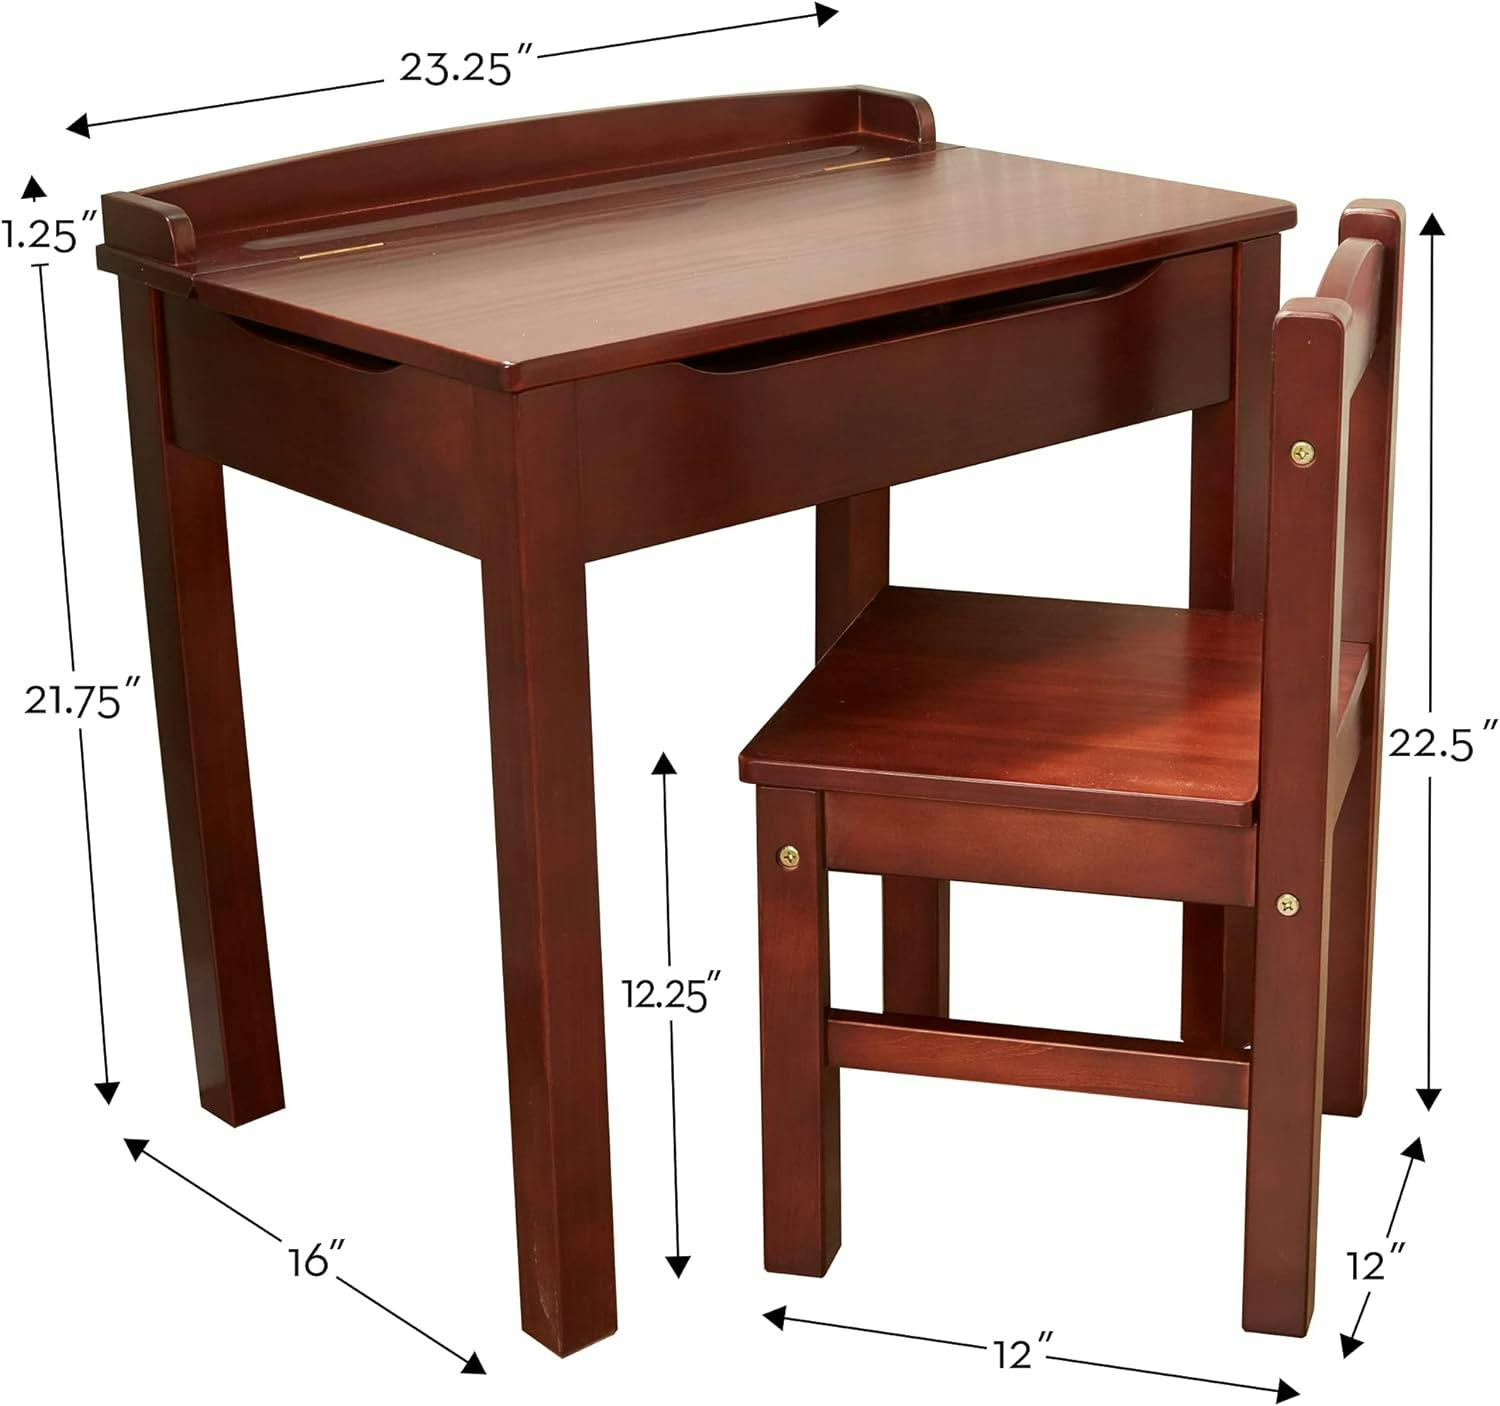 Espresso Brown Wooden Writing Desk with Filing Cabinet for Kids